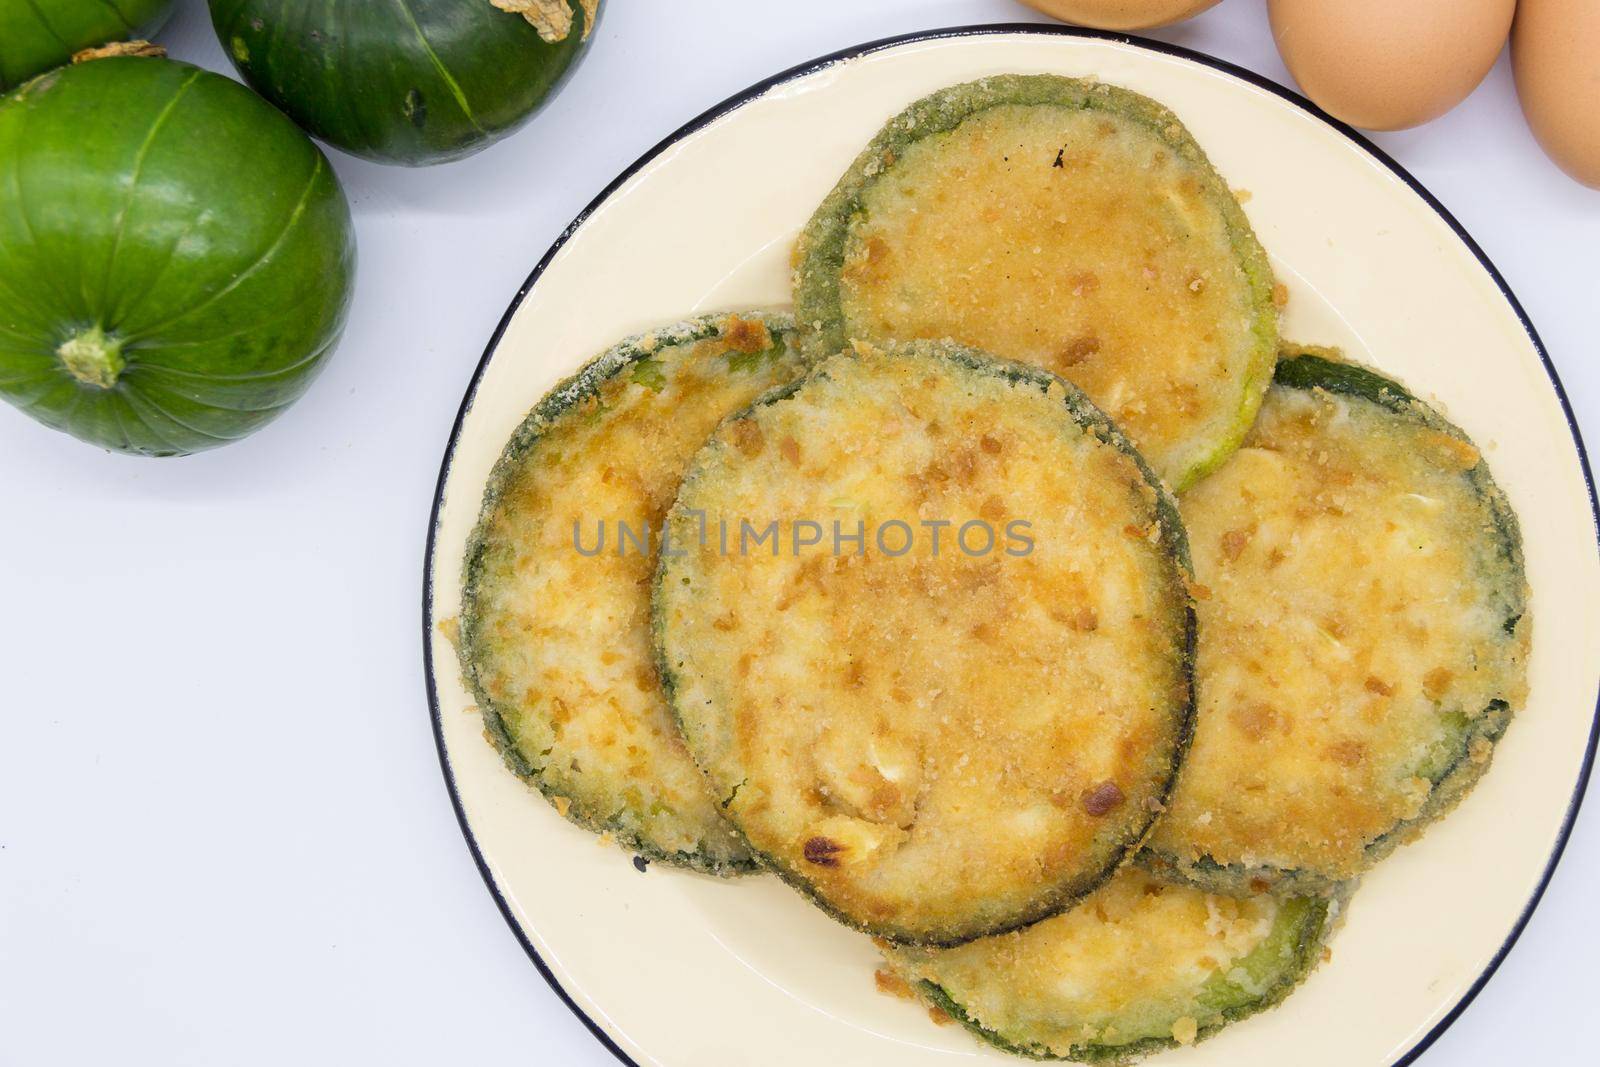 Trunk zucchini in baked or fried milanesas, Argentine cuisine by GabrielaBertolini